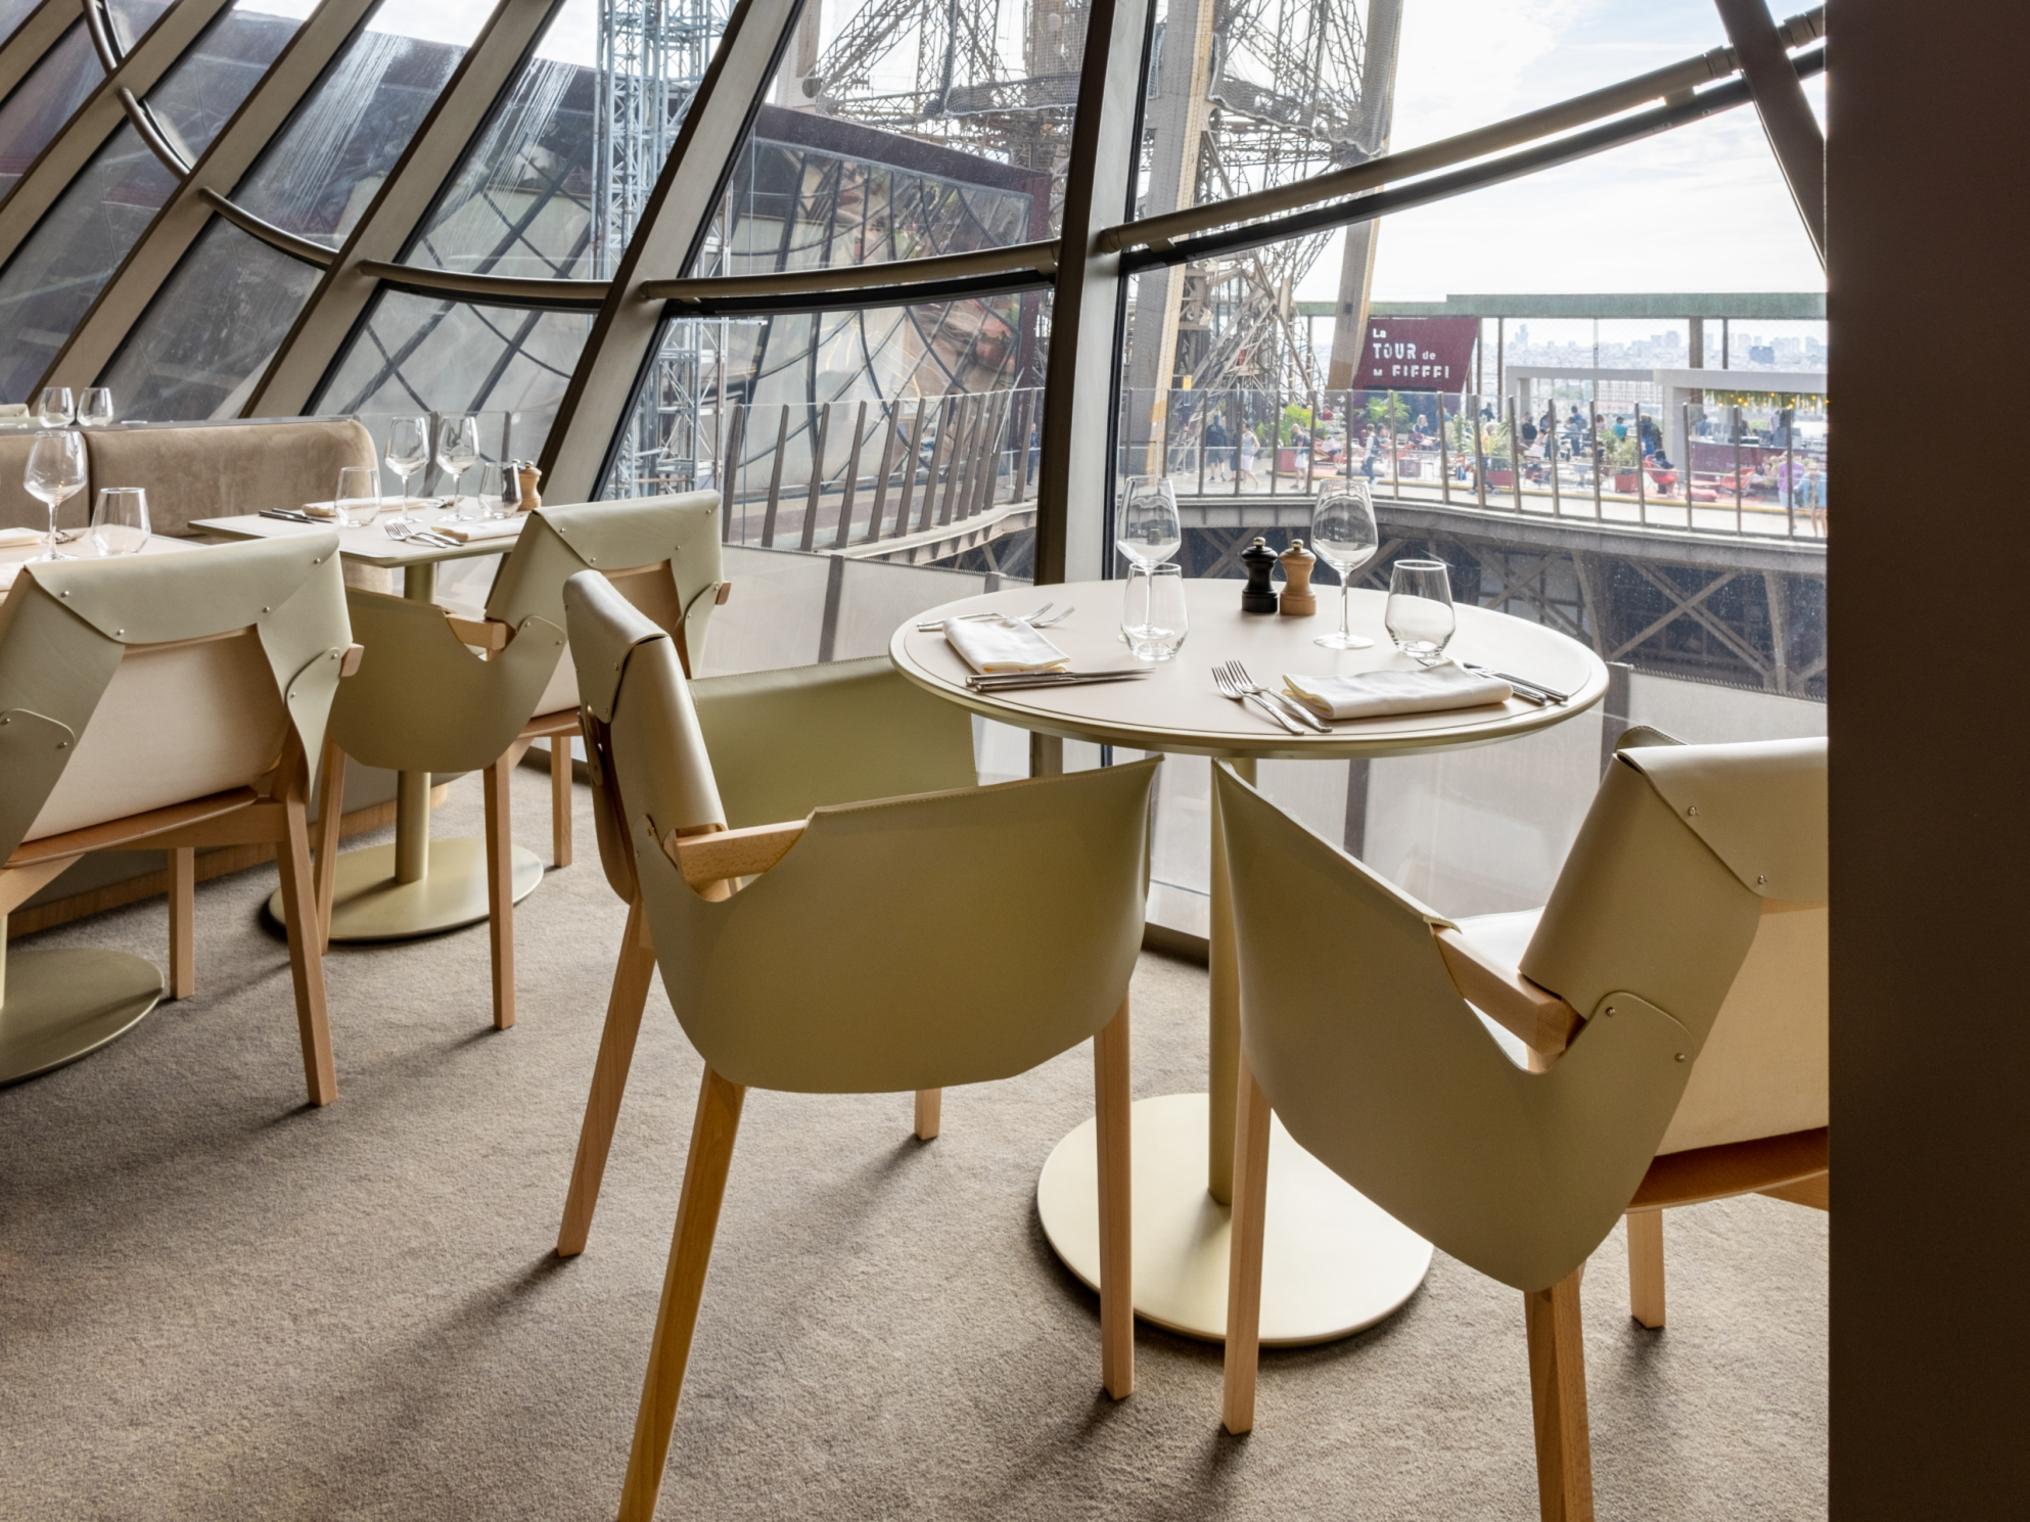 Lunch on Top of the Eiffel Tower: Tourist Trap?